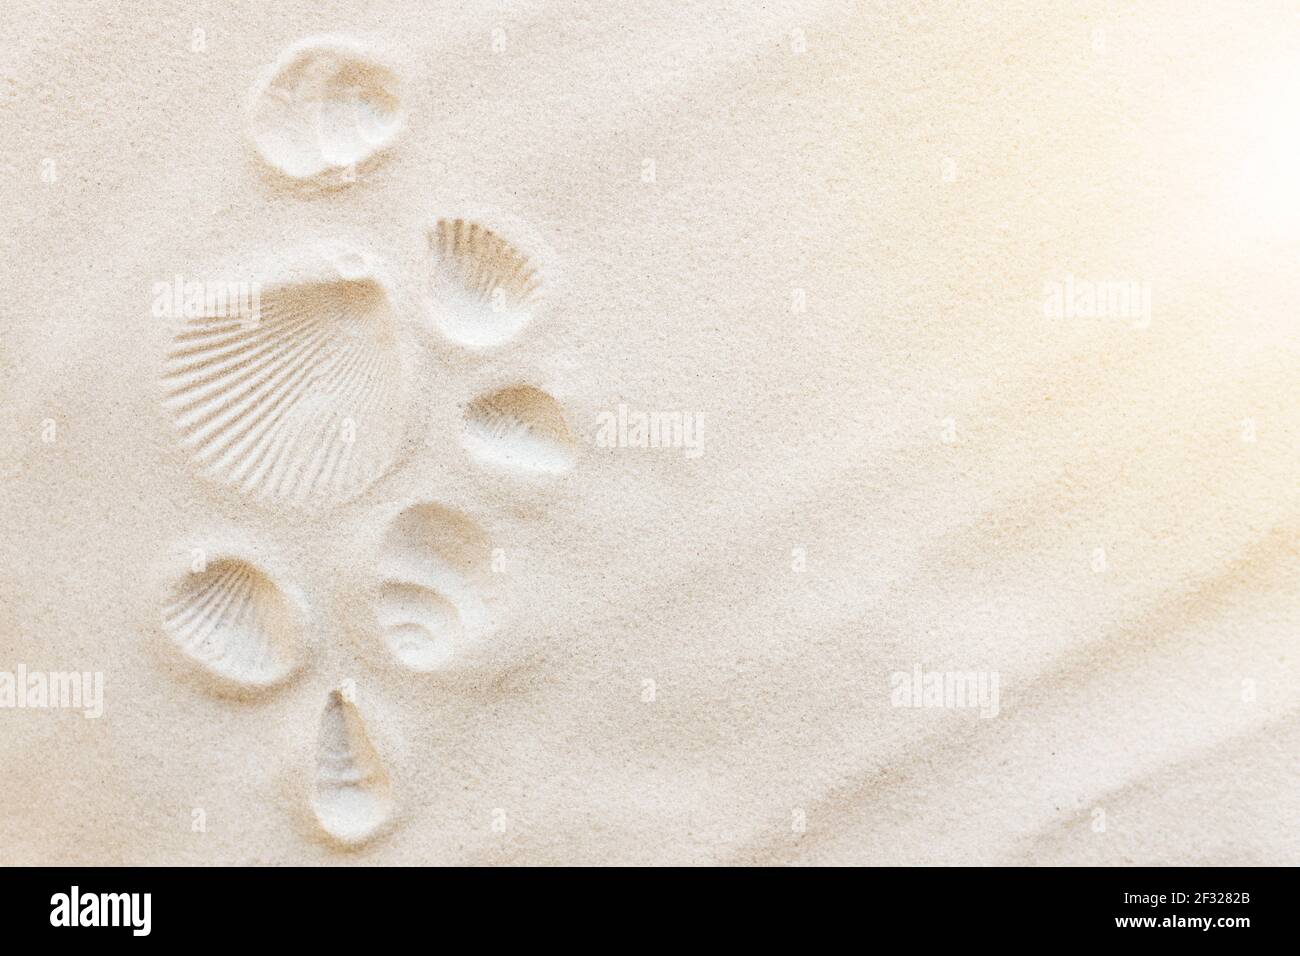 Travel, vacation concept. Sea shells on sand and blue background. Travelling, trip. Travel text. High quality photo Stock Photo